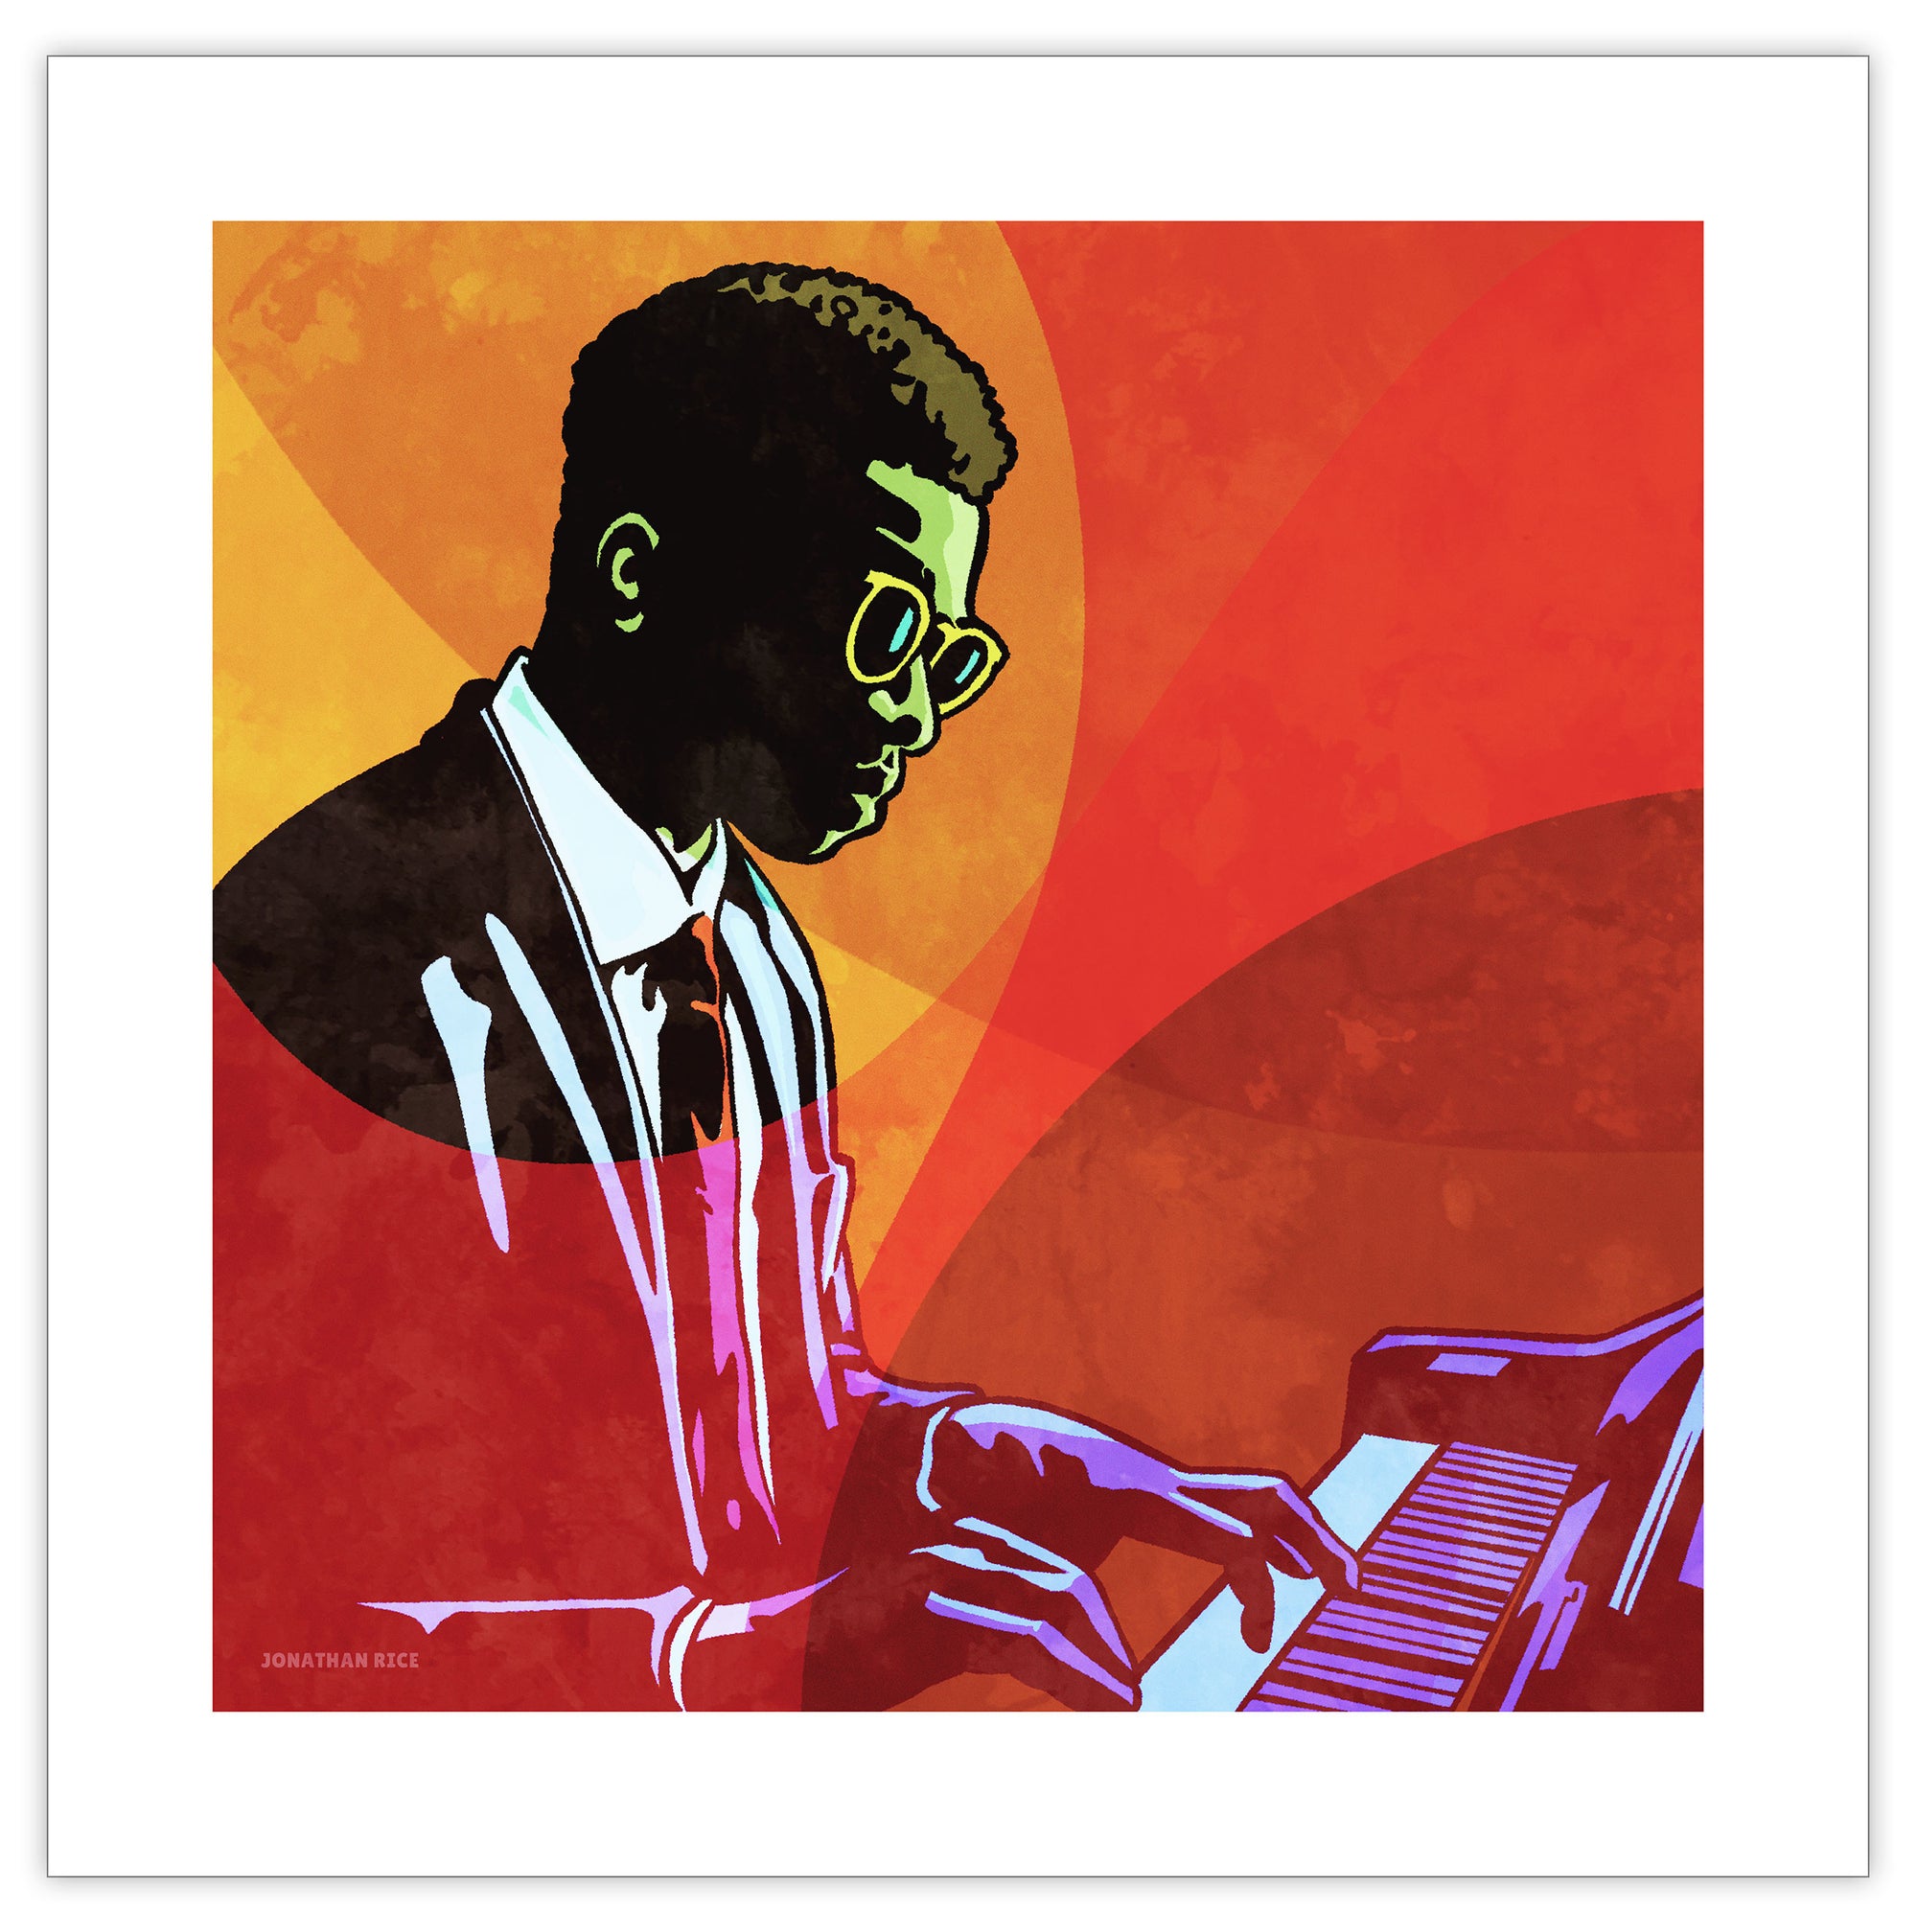 An upbeat and colorful print of cool New Orleans Jazz Pianist. Bold graphic lines and bright colorful shapes create an energetic portrait of the black musician. 